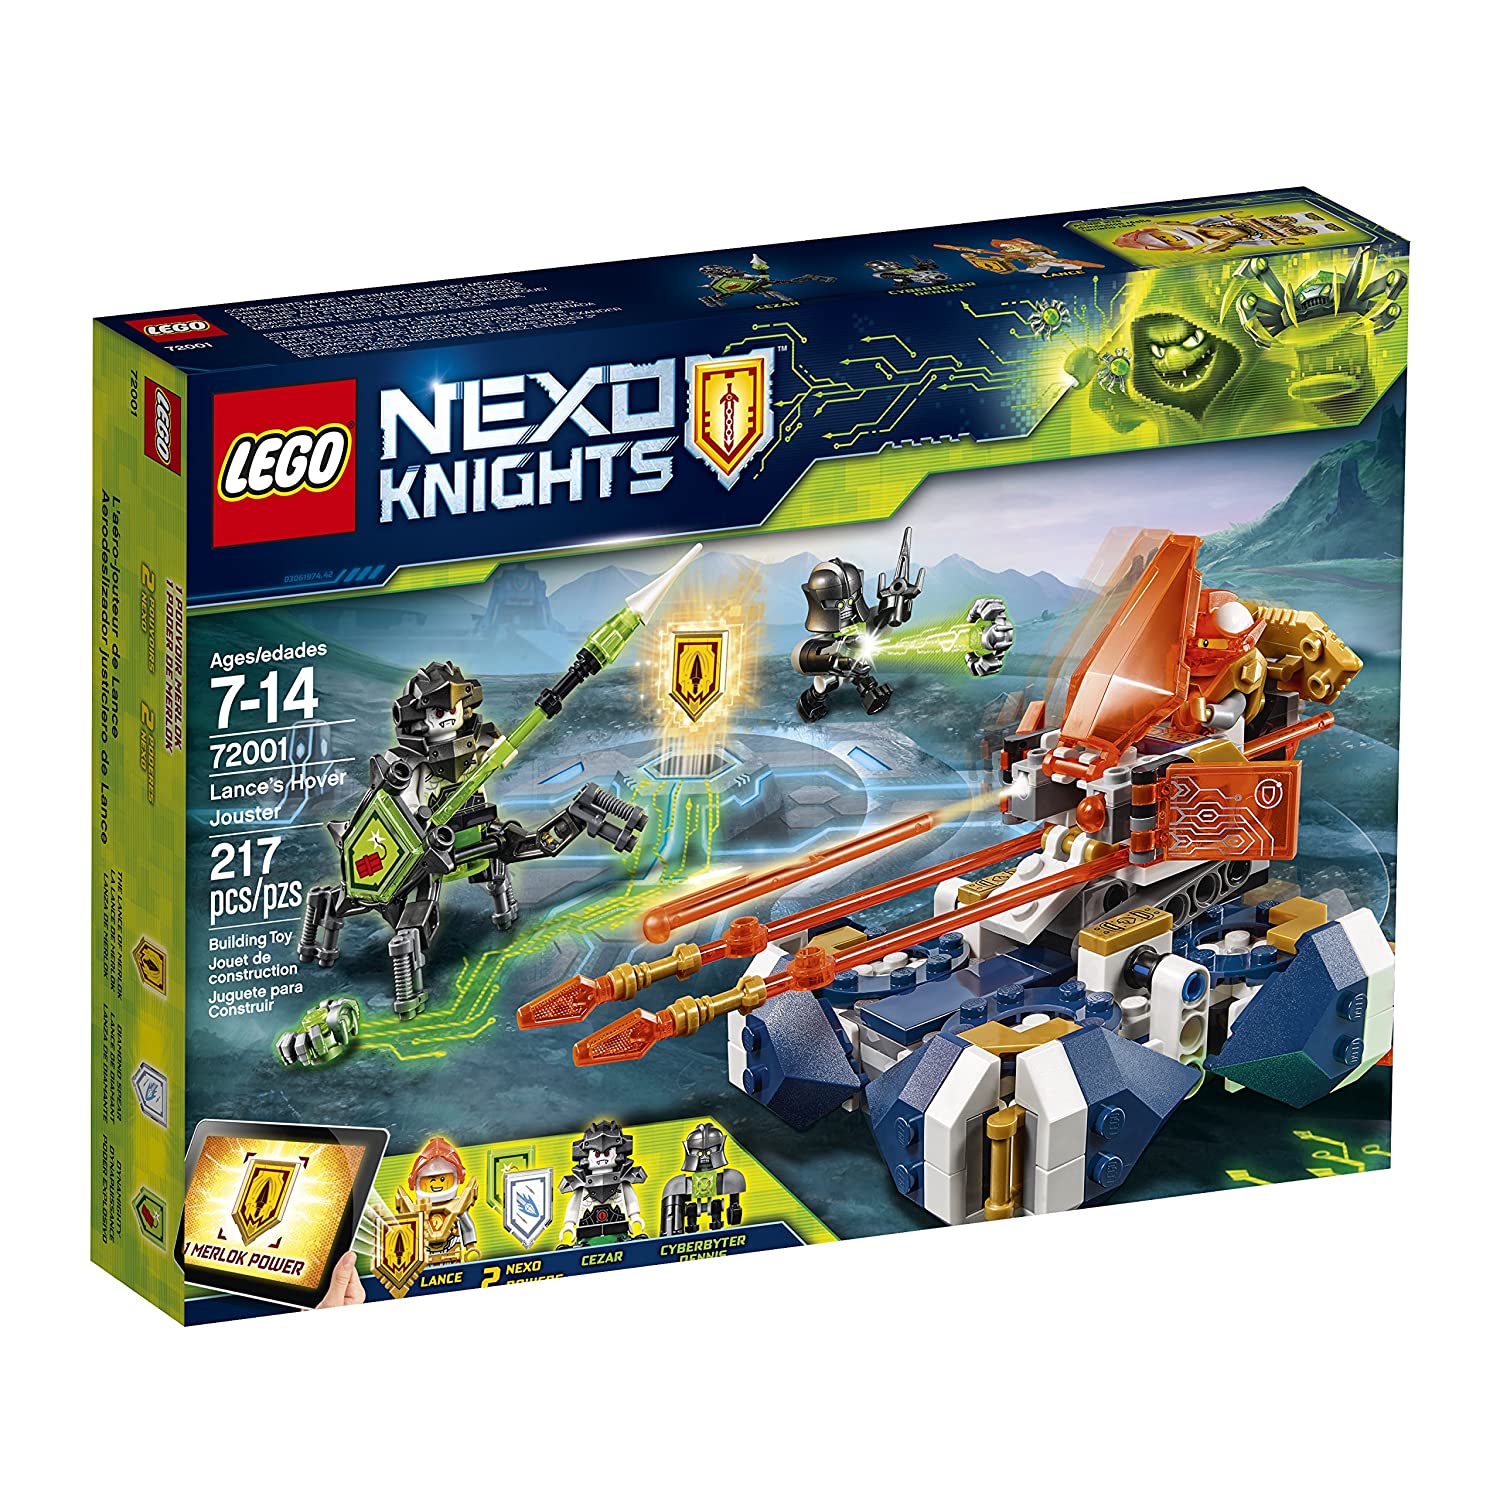 9 Best LEGO Nexo Knights Set 2023 - Buying Guide & Reviews 7